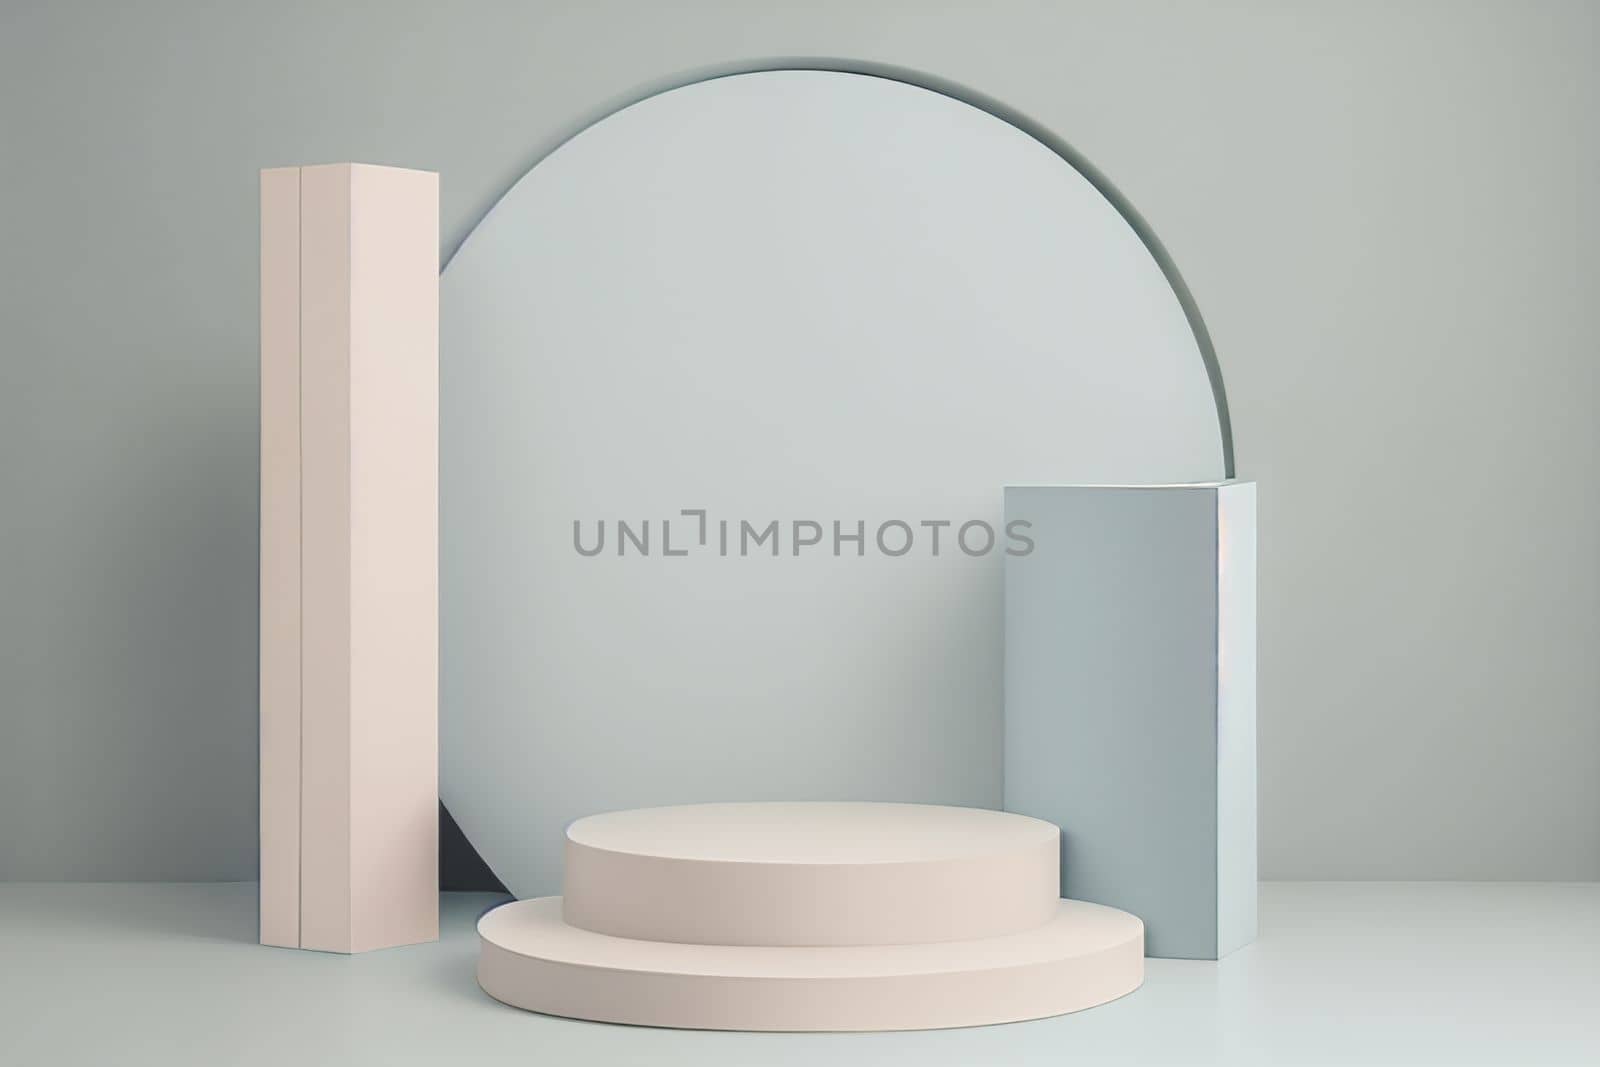 Pedestal podium with rounded corners in blue and white. Platform with geometric shapes. by FokasuArt